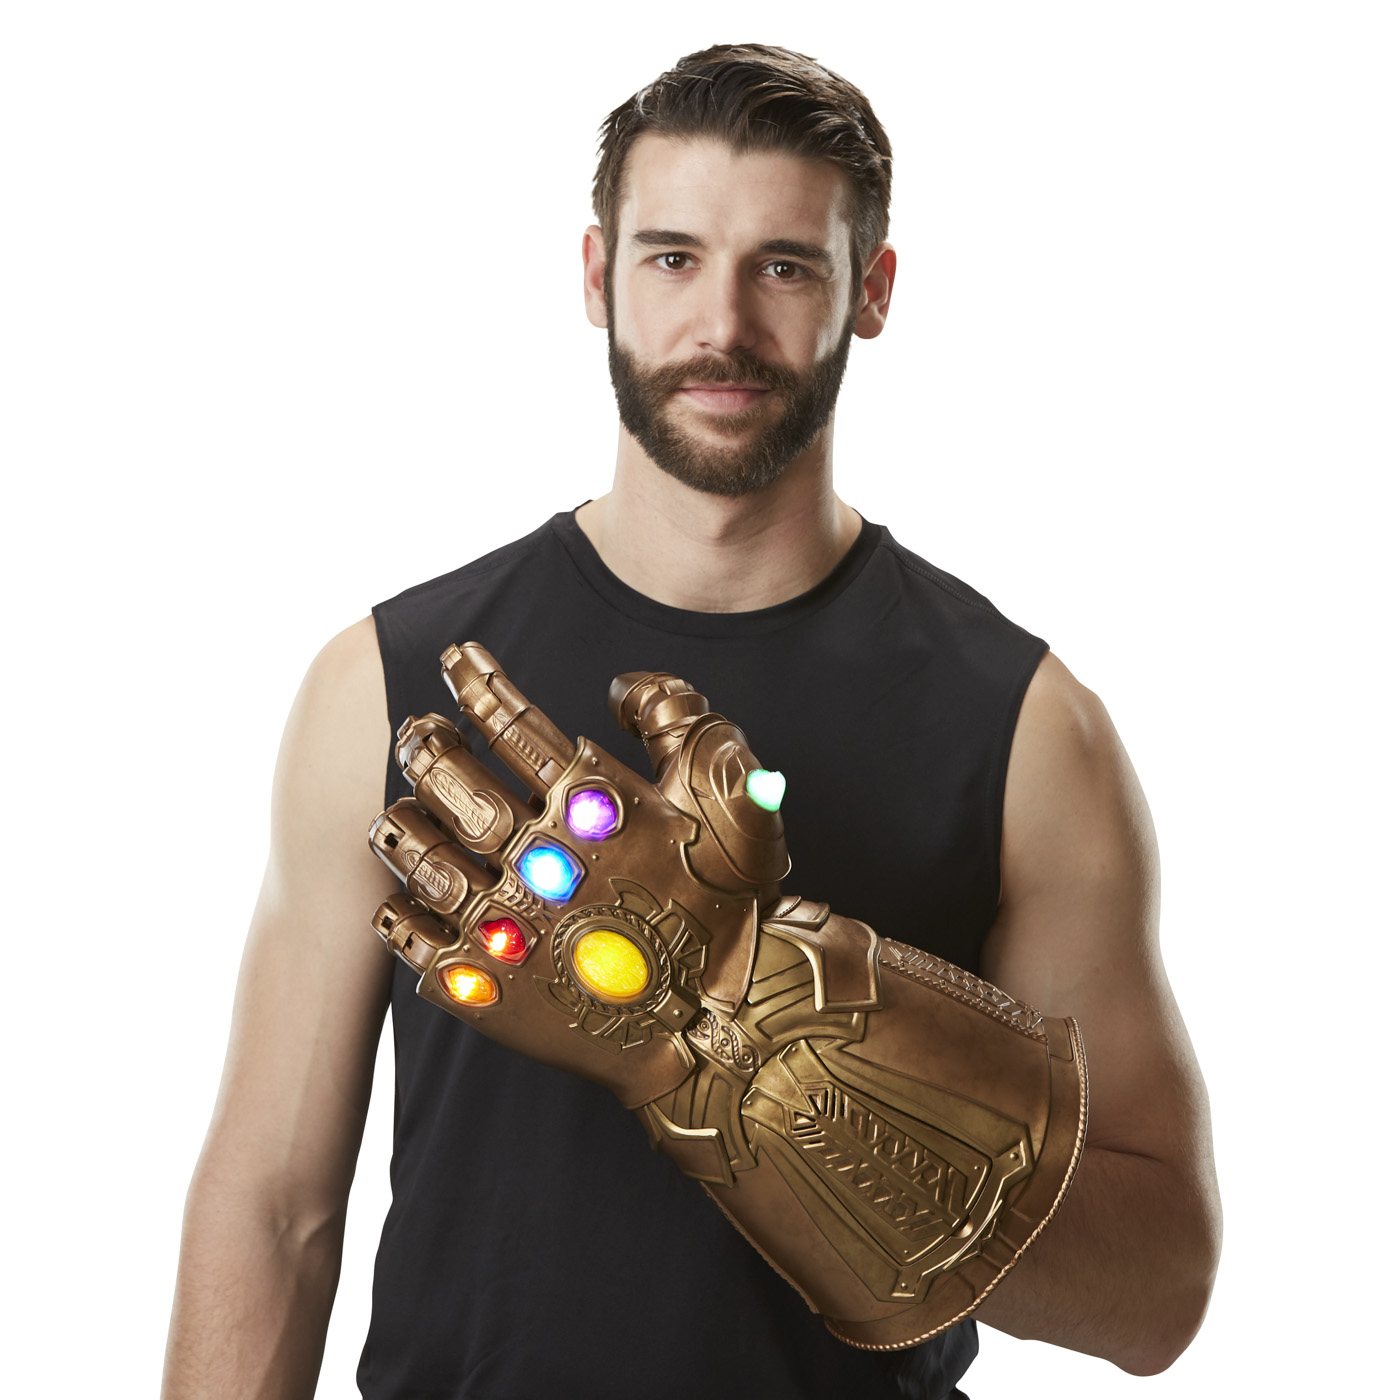 INFINITY GAUNTLET. P7,999.75 at leading toy stores. Photo courtesy of The Walt Disney Company (Philippines), Inc. 